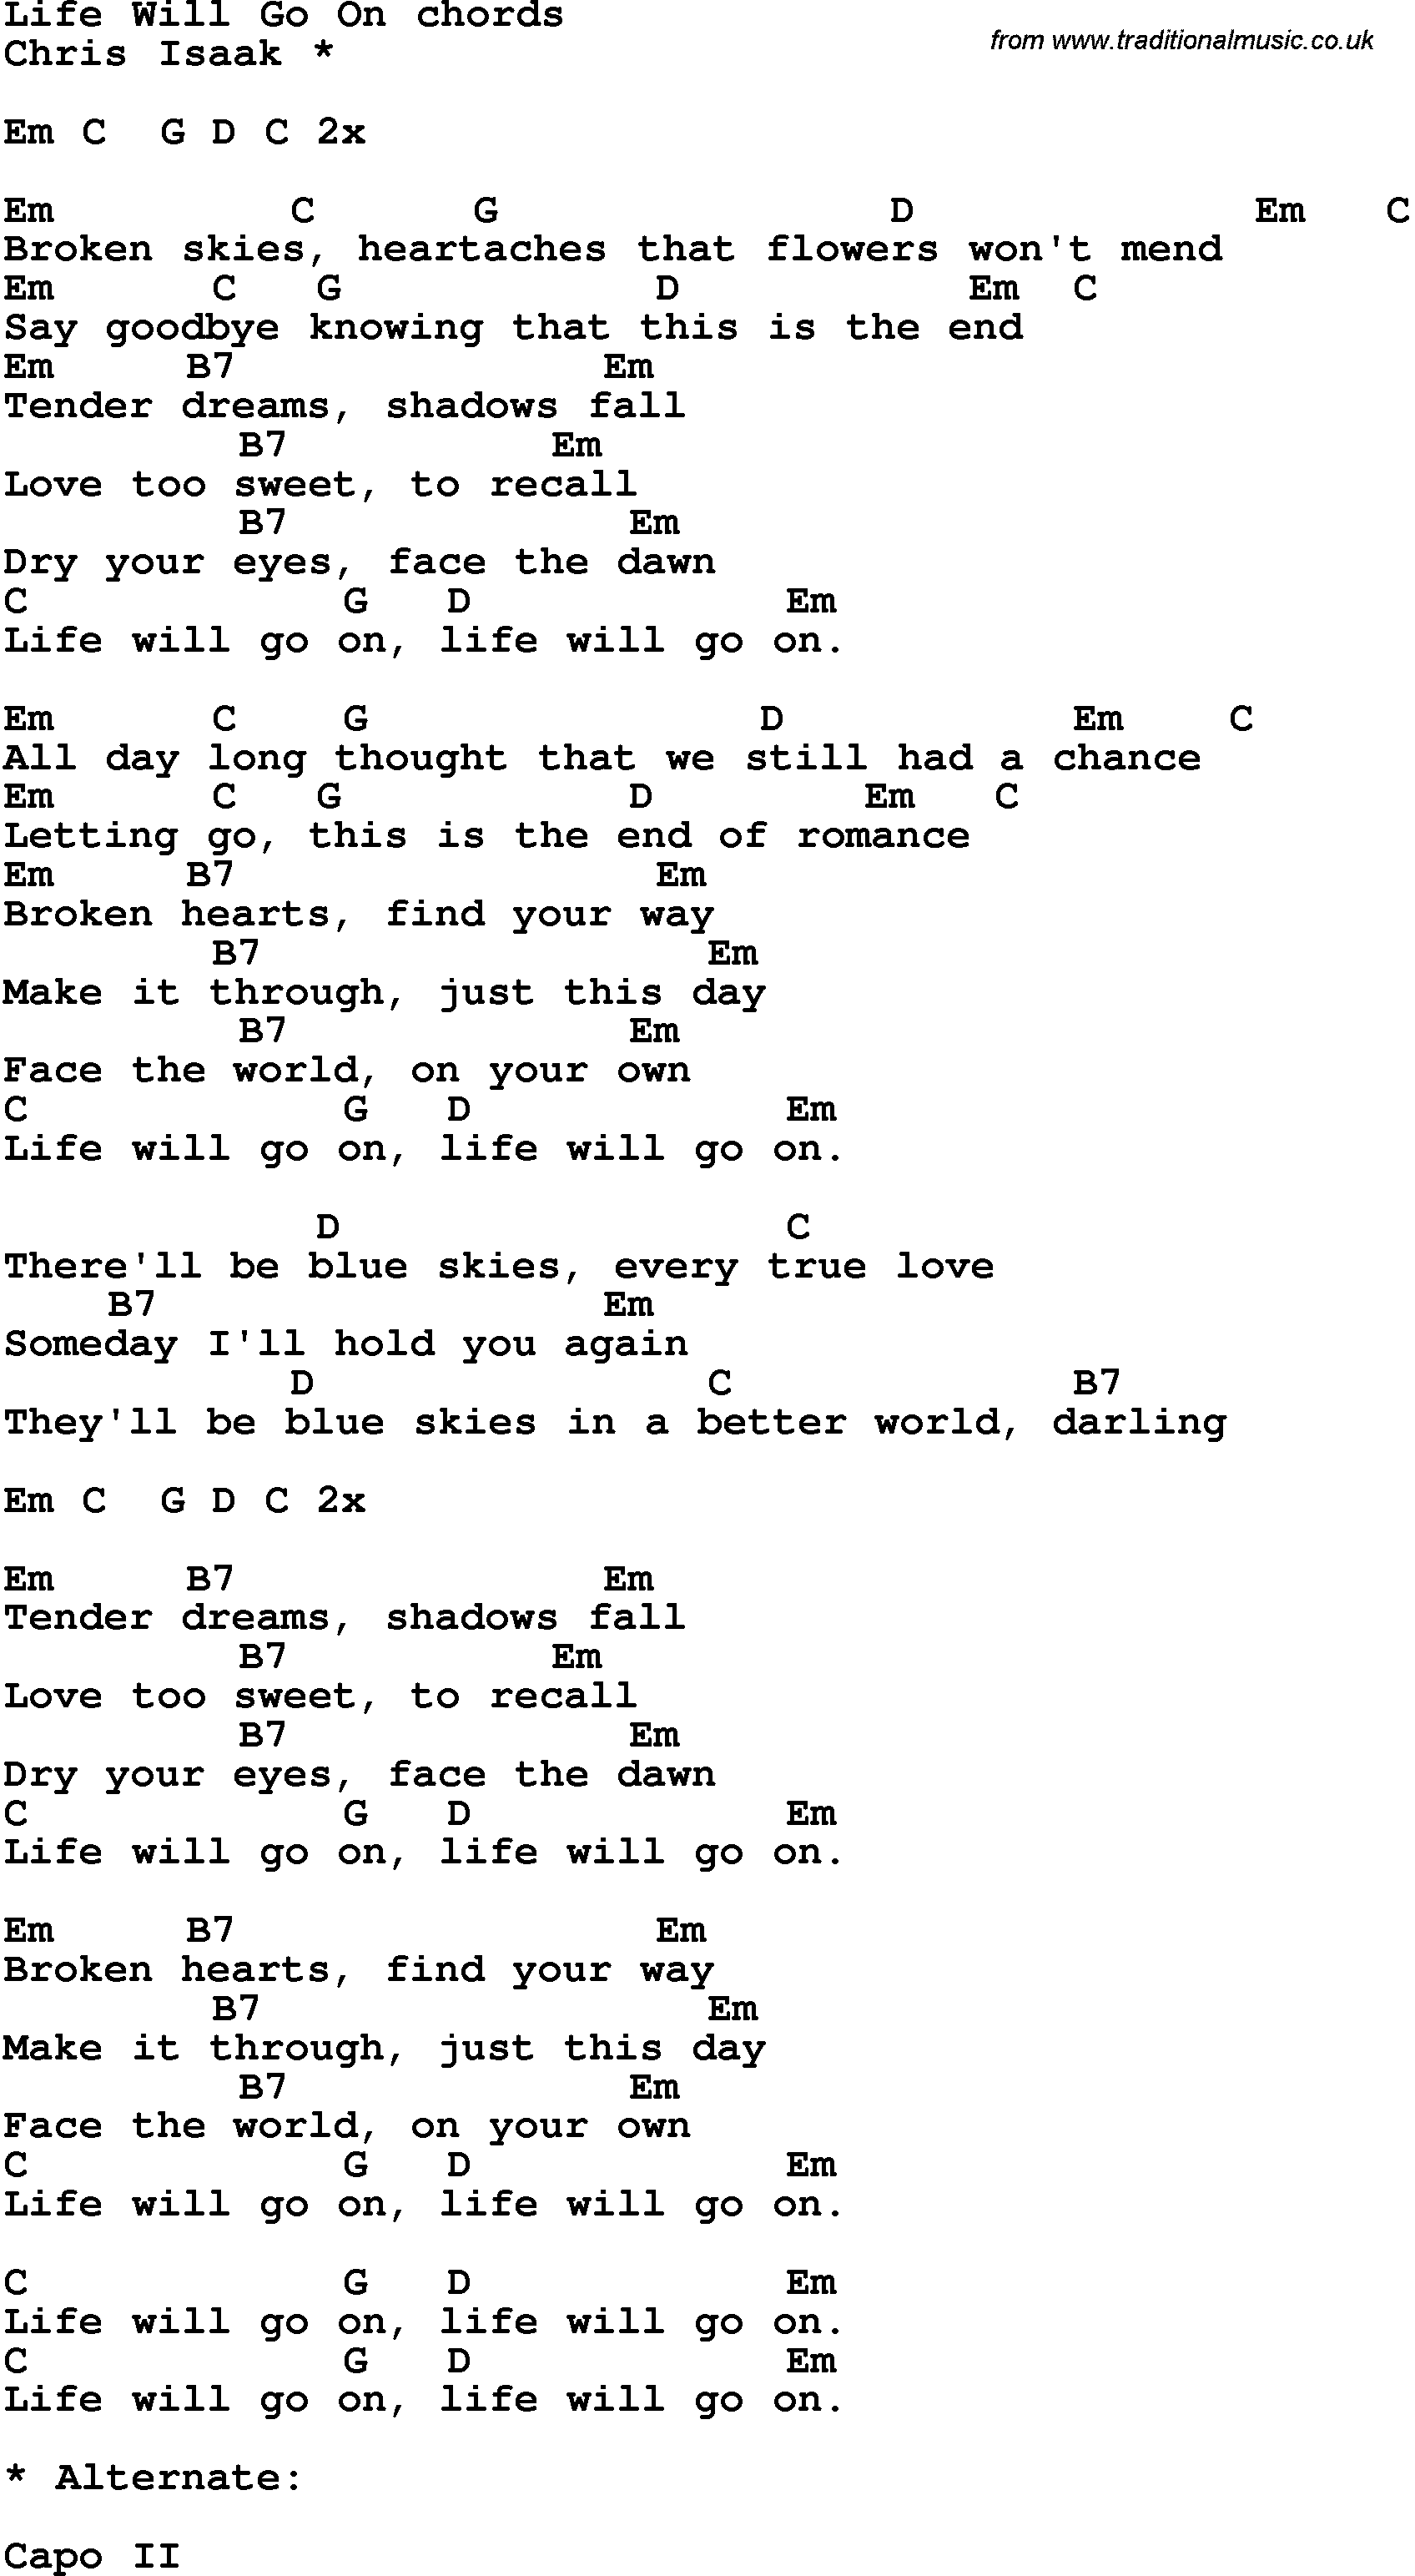 Song Lyrics with guitar chords for Life Will Go On